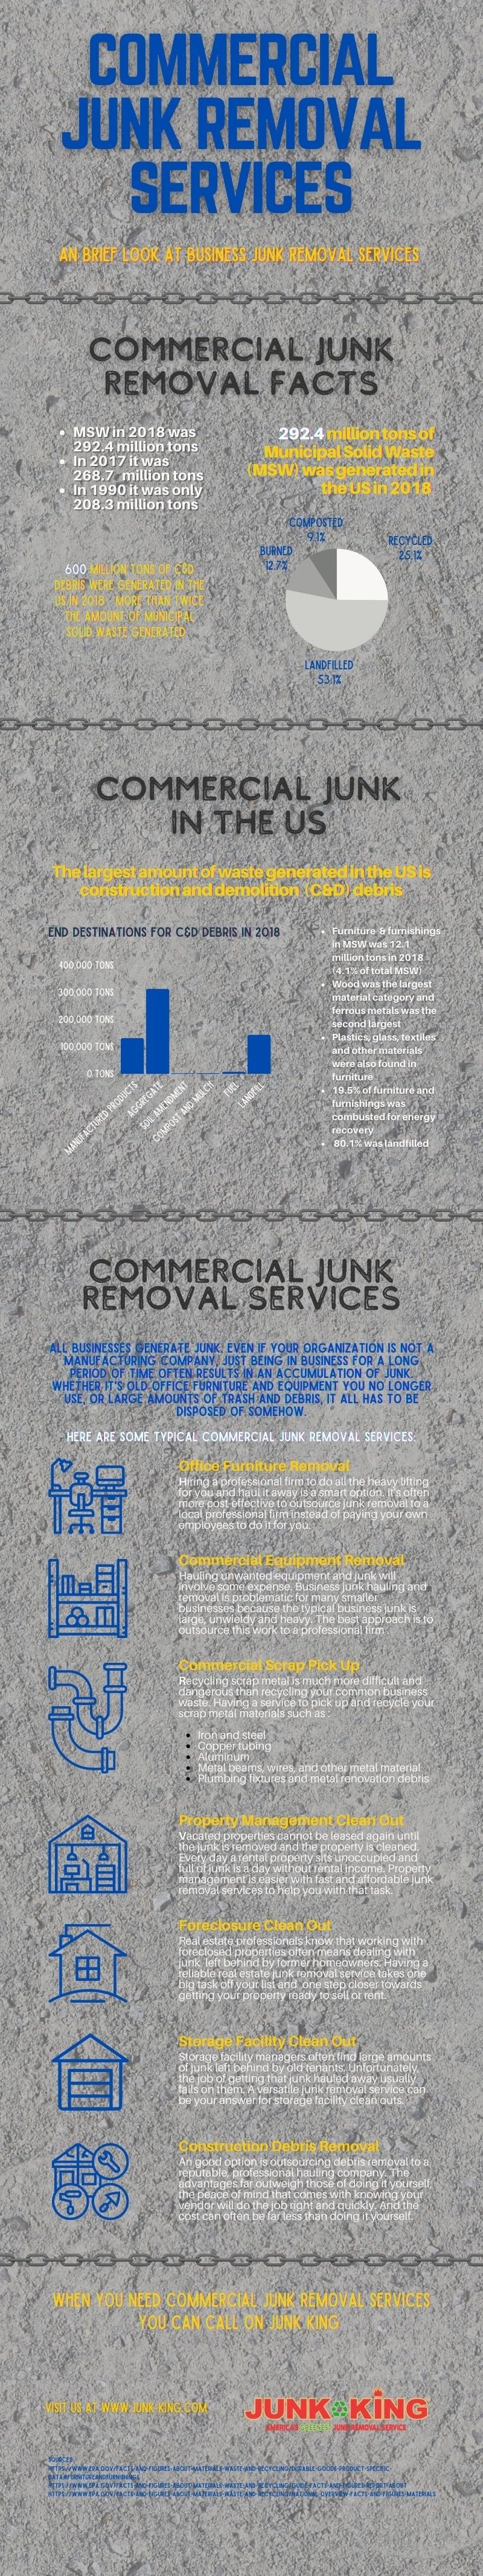 commercial-junk-removal-services-infographic